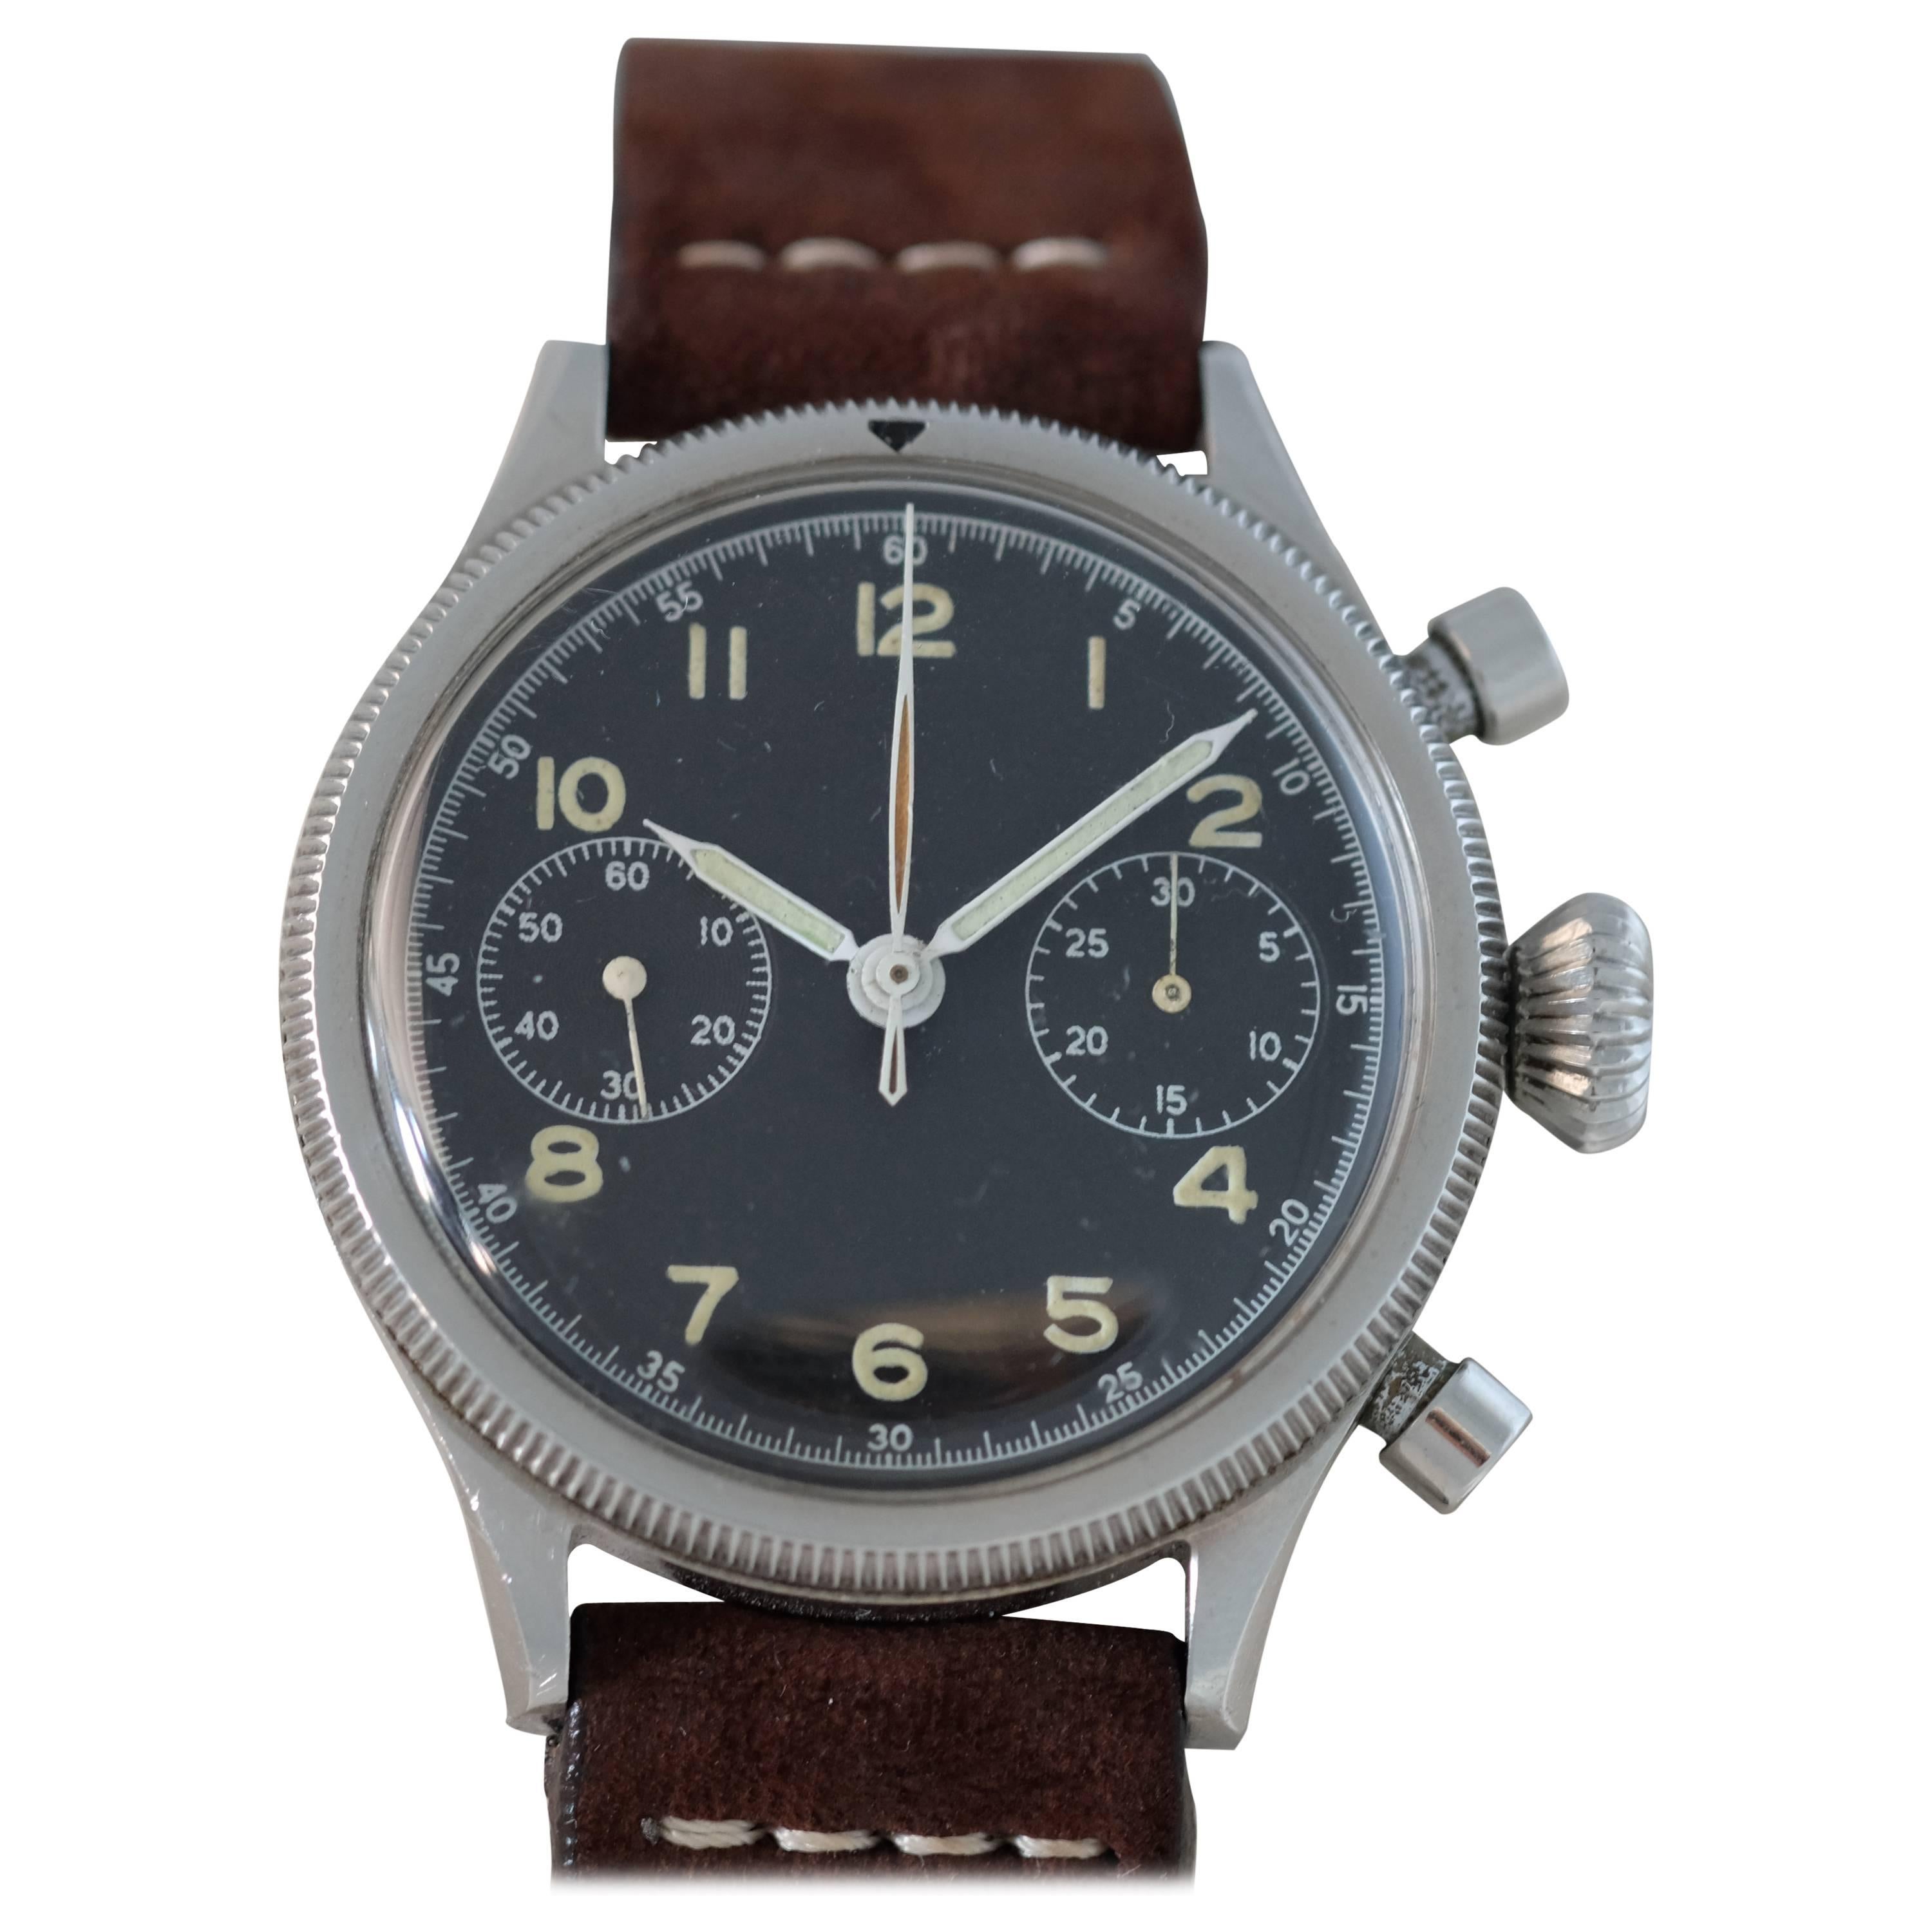 Breguet Stainless Steel Type 20 French Military Chronograph Wristwatch